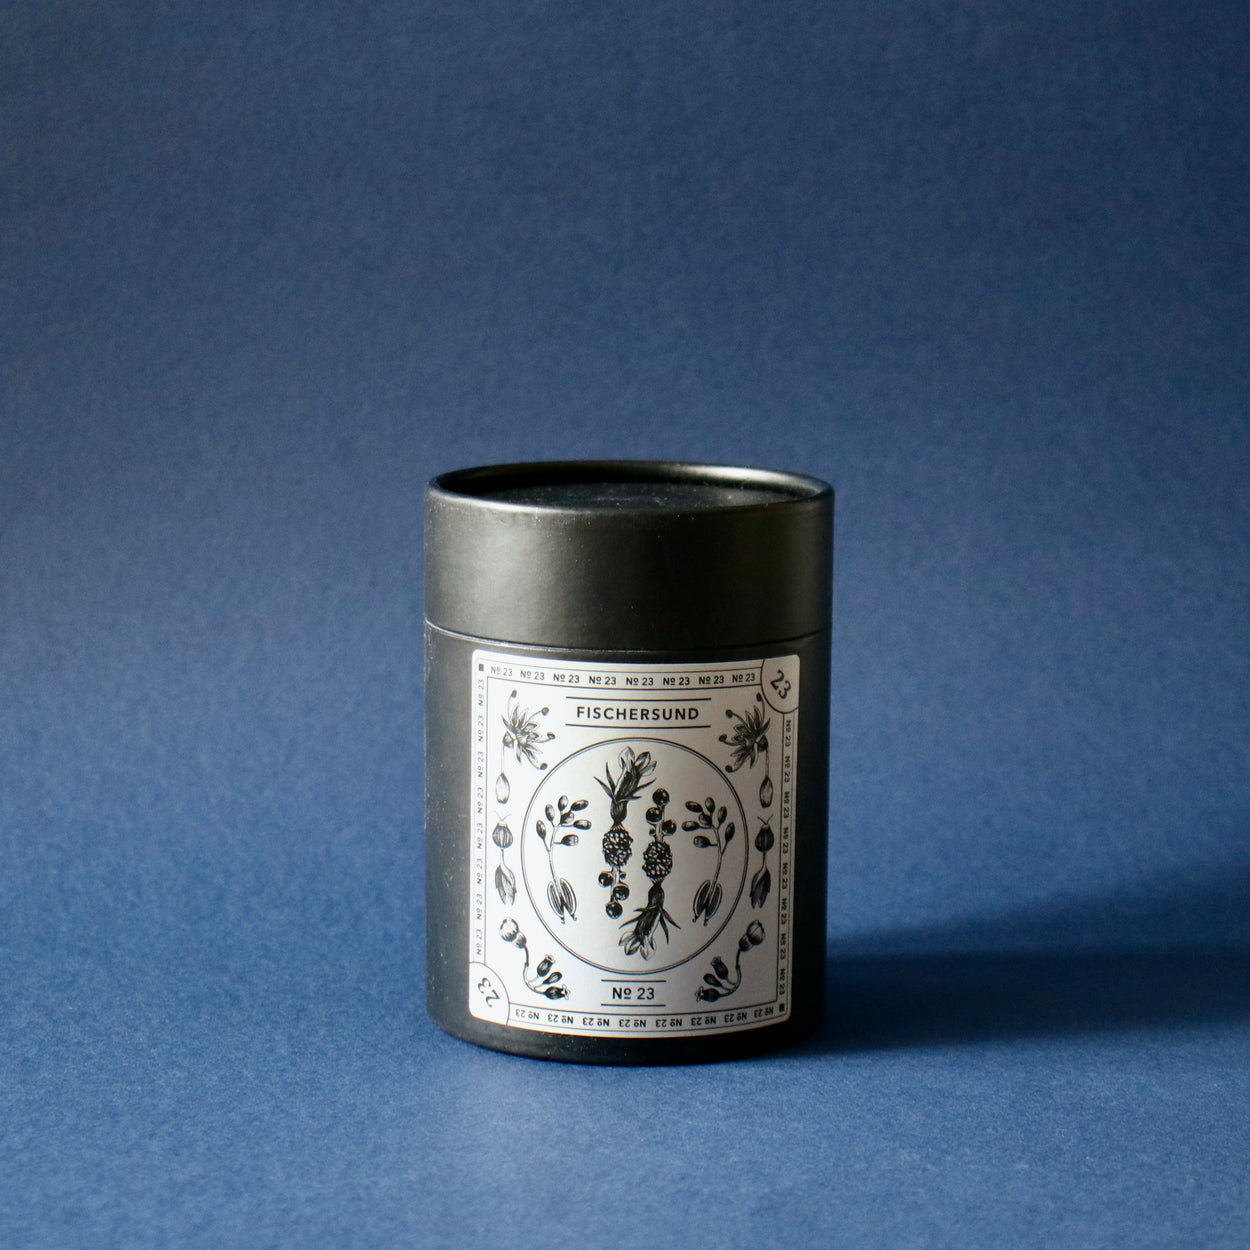 Fischersund No.23 candle with tube packaging against blue background.